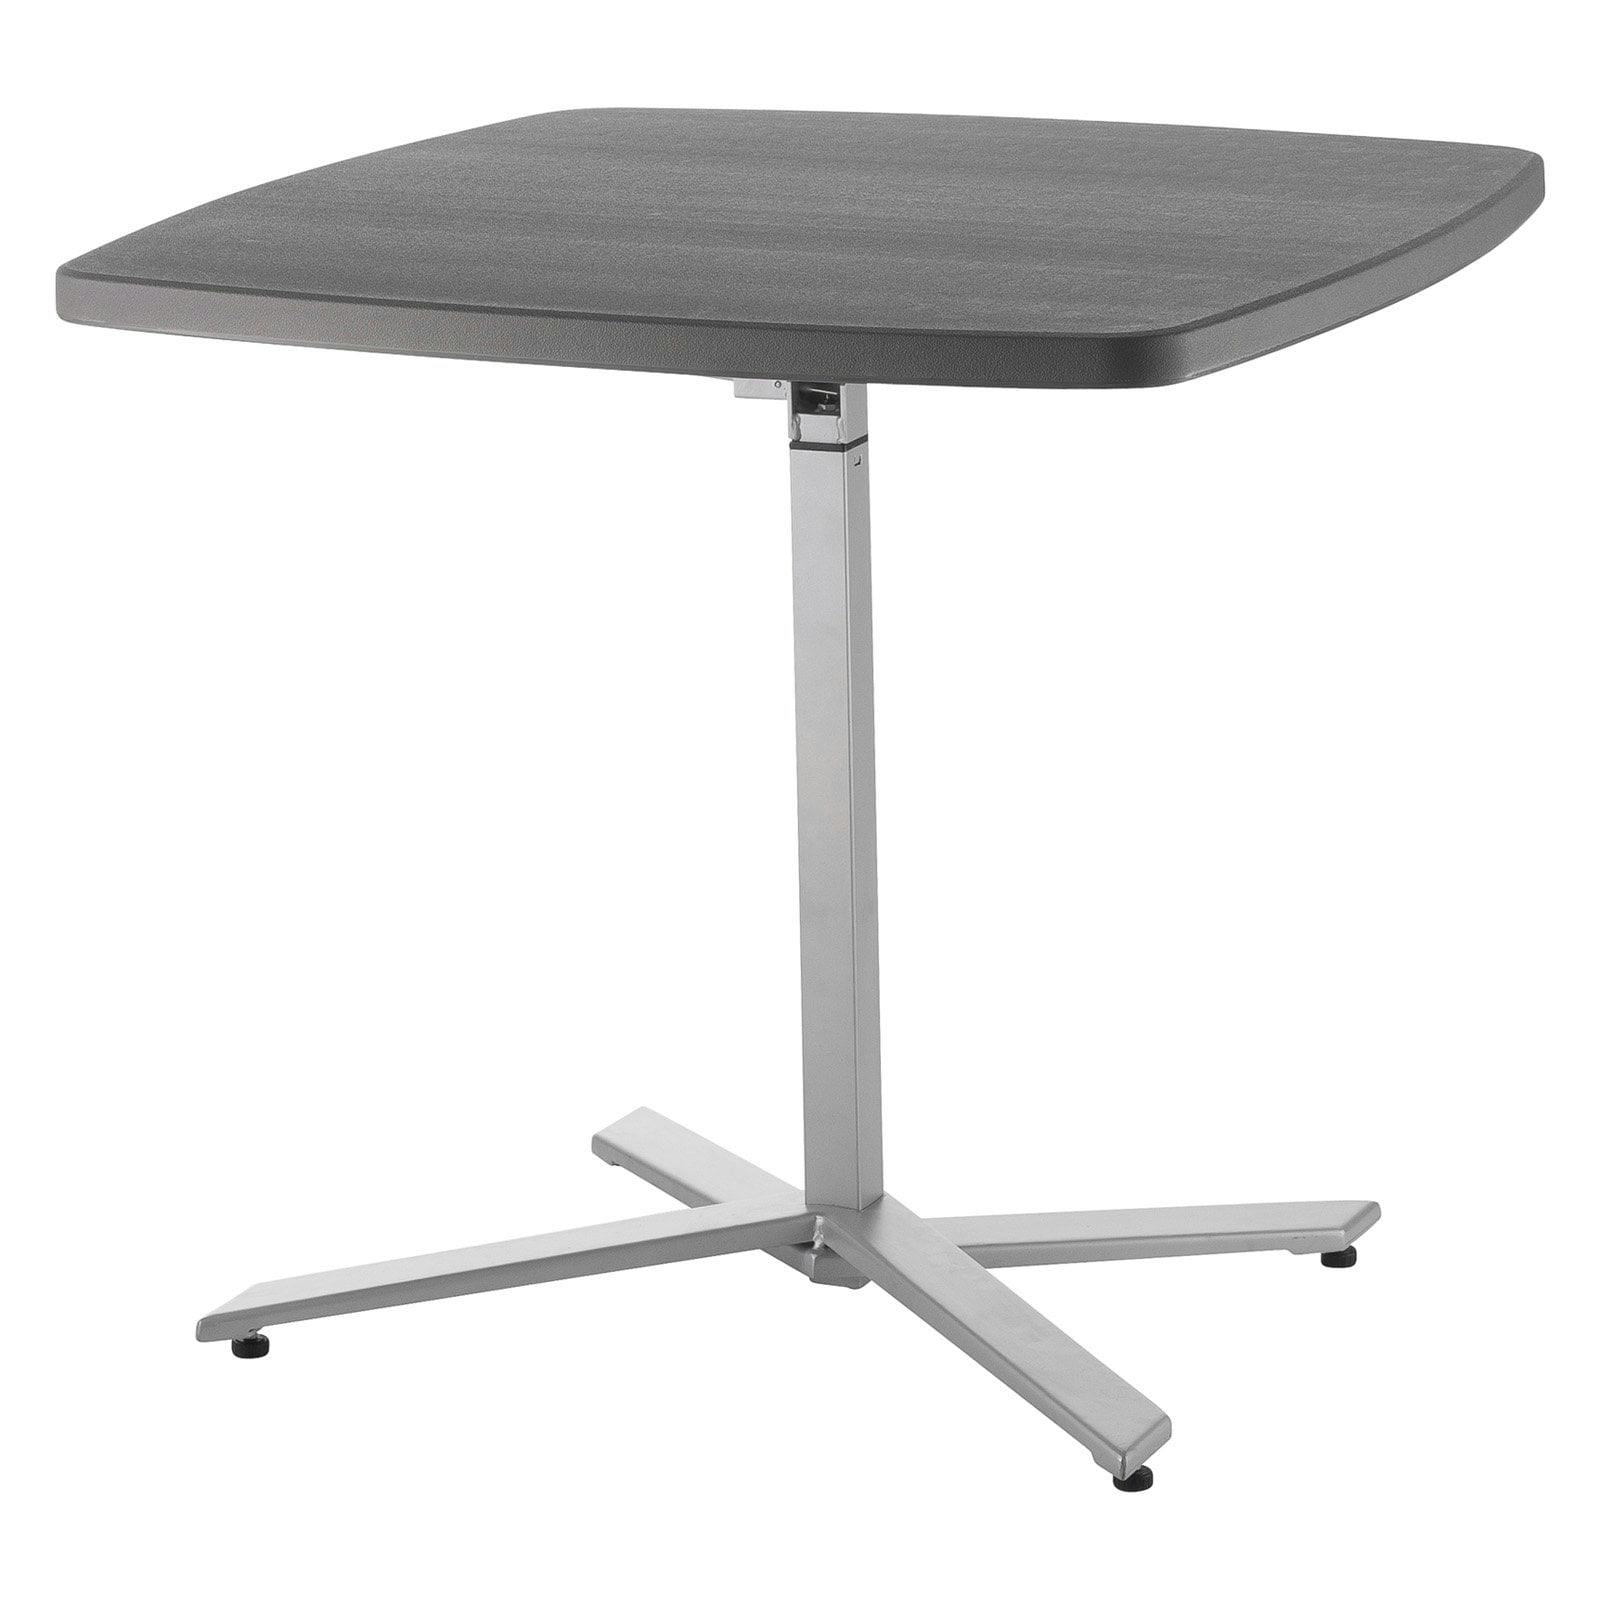 Charcoal Slate Contemporary Adjustable Bar Height Cafe Table